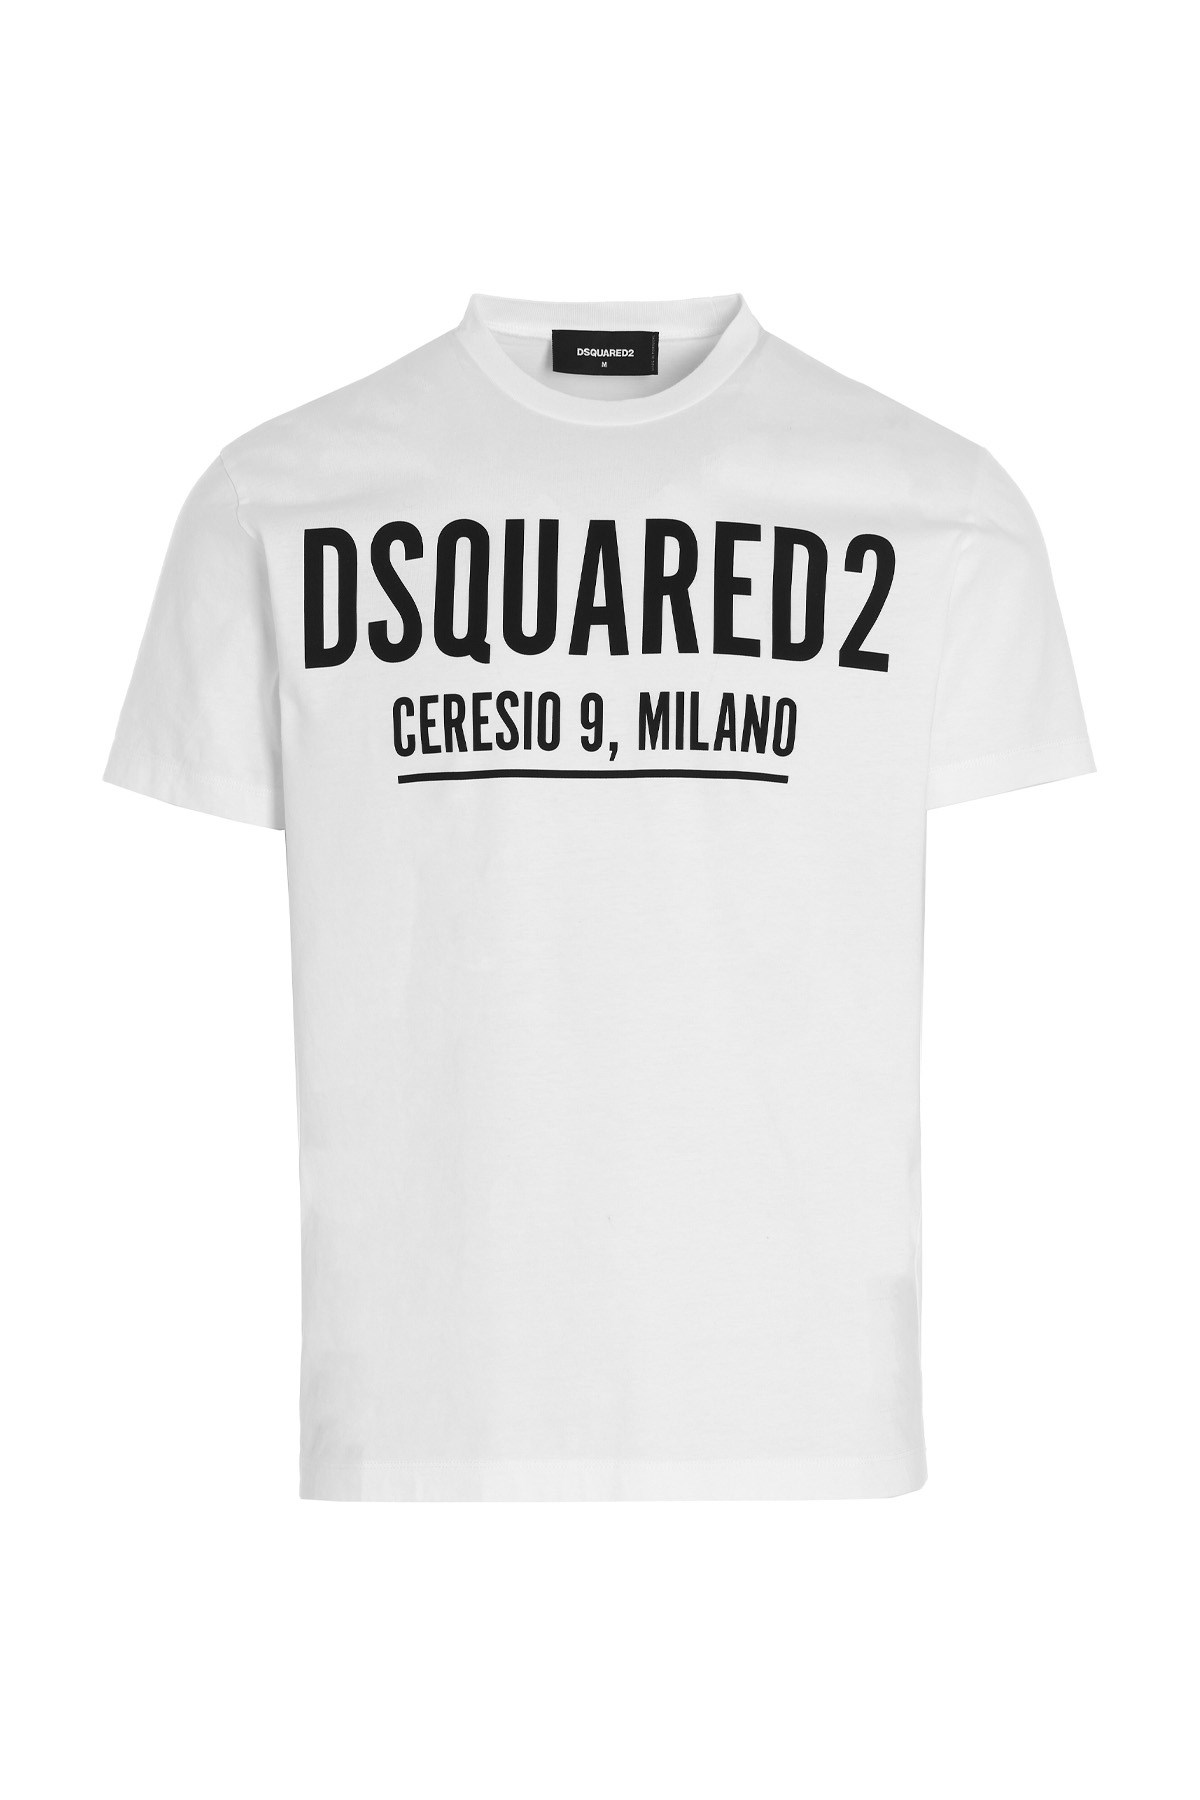 DSQUARED2 'Ceresio9 Cool' T-Shirt